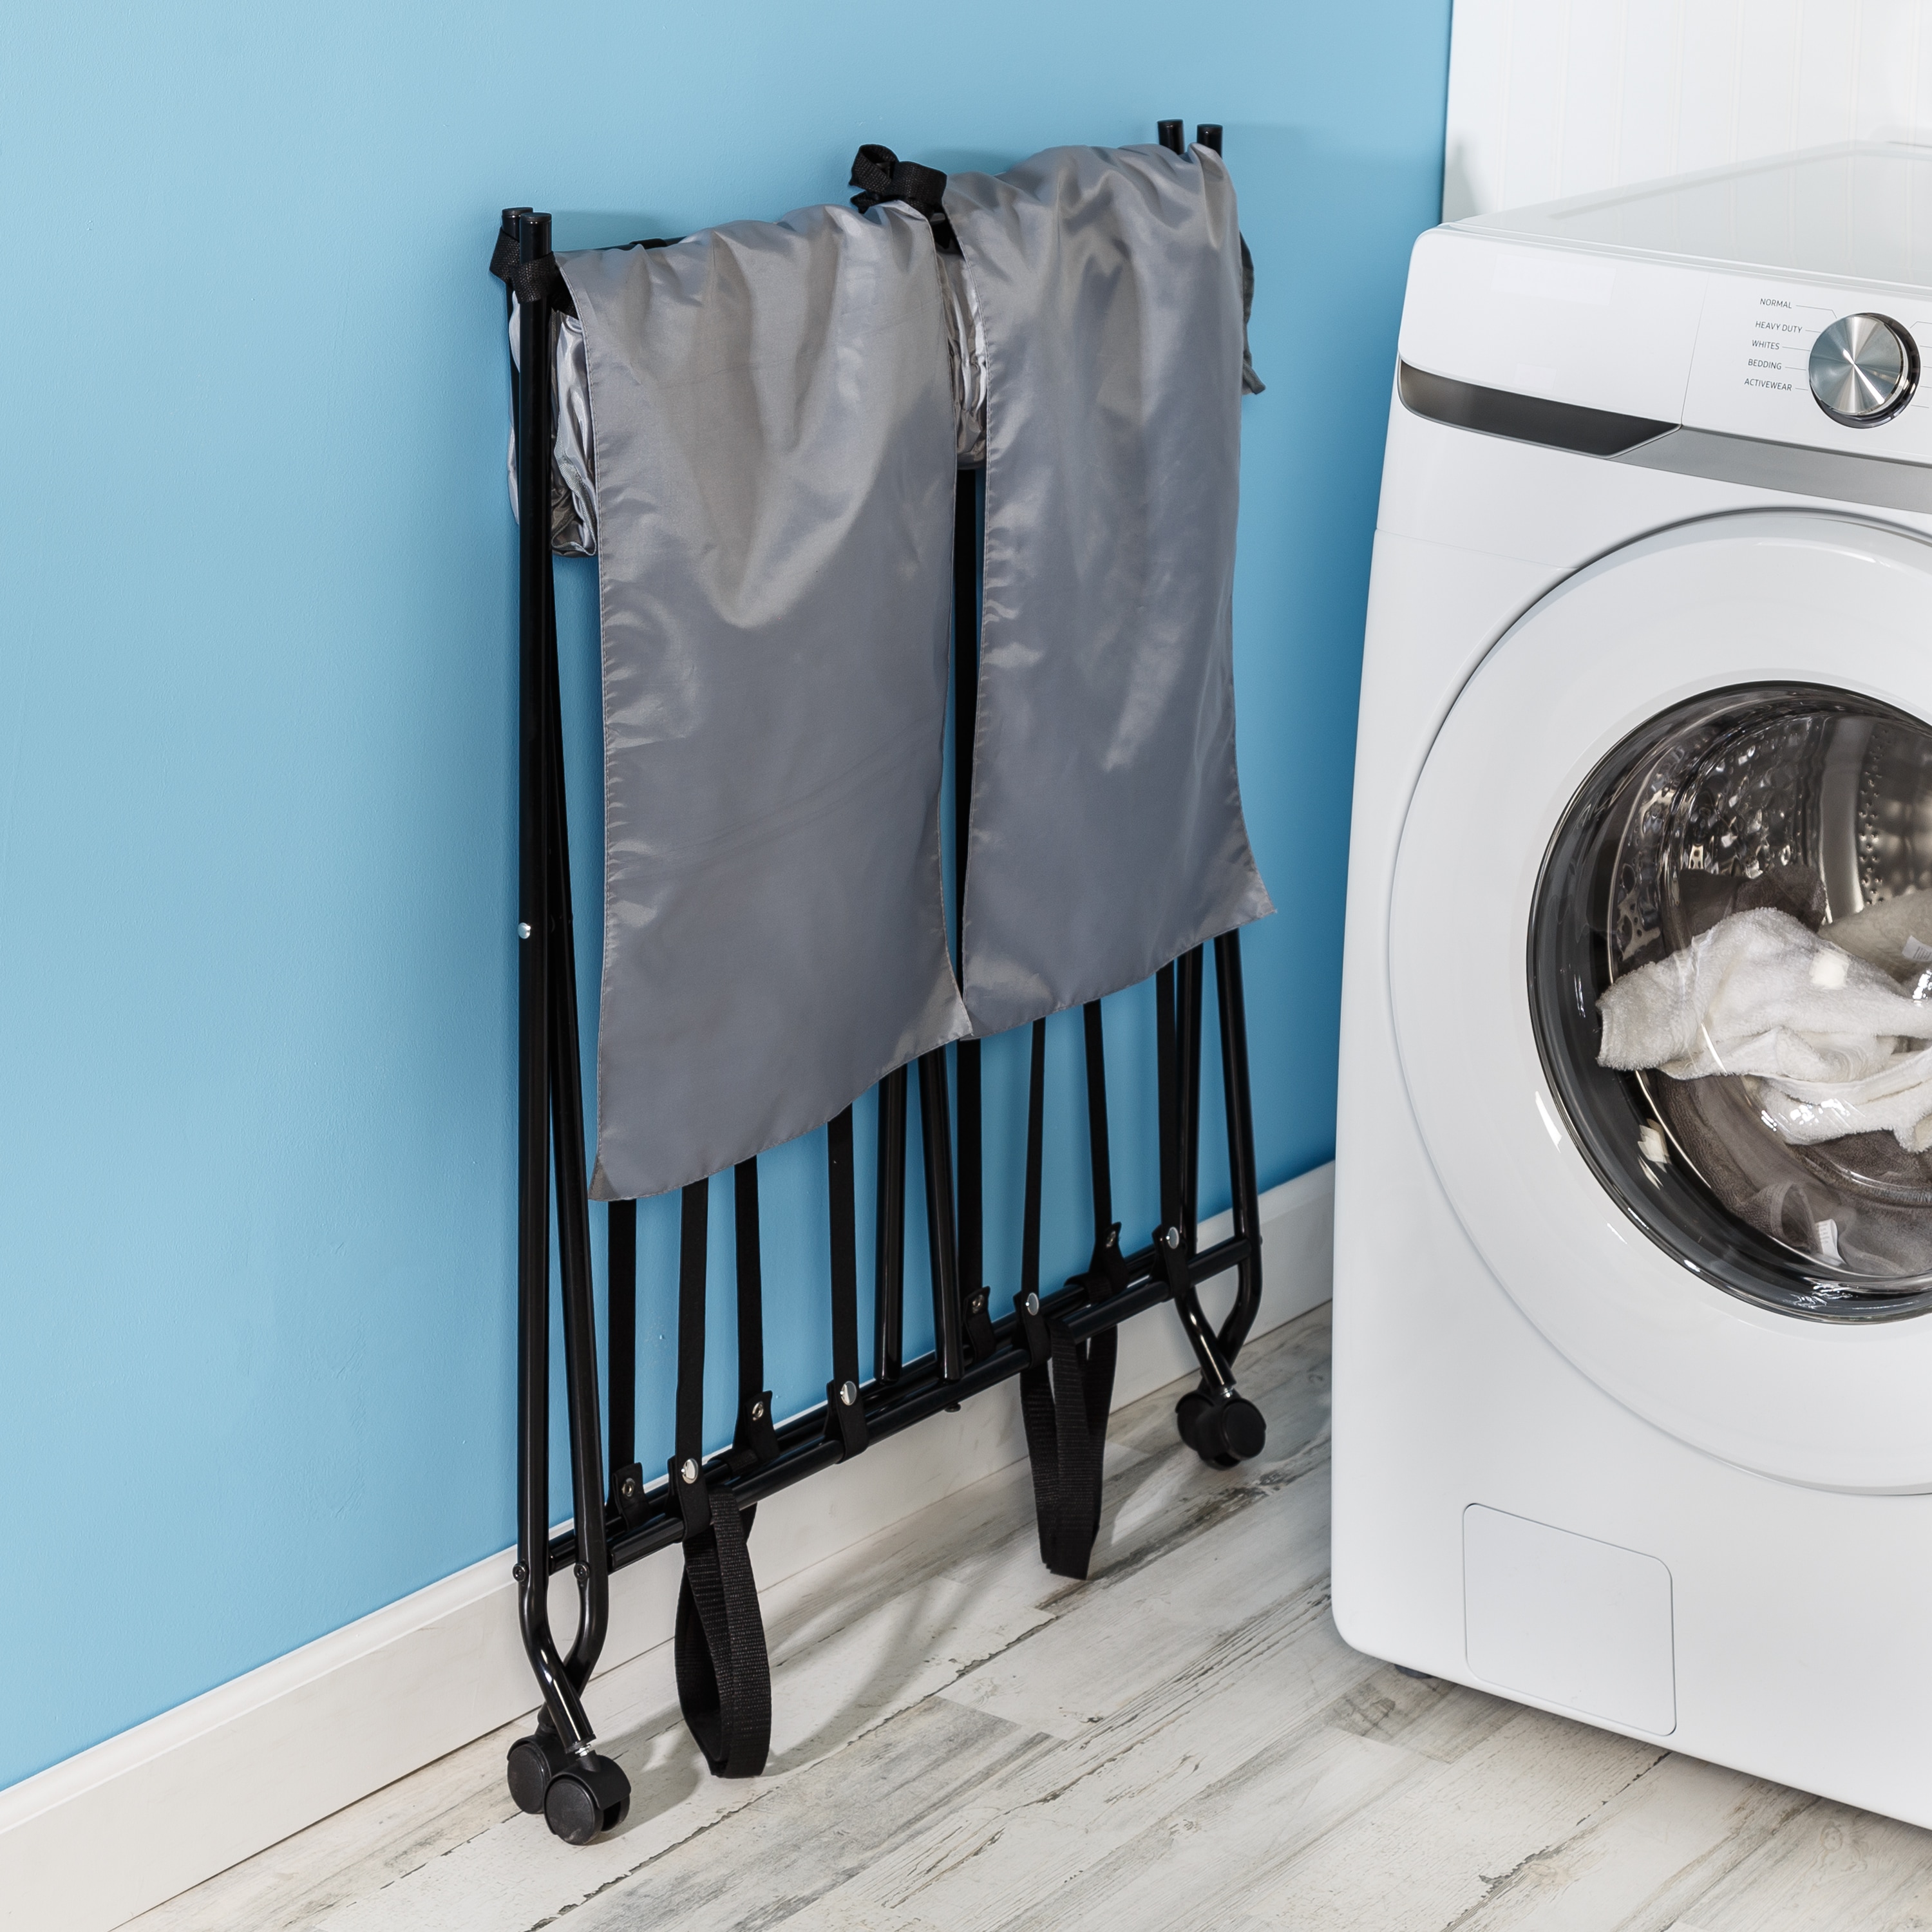 Black Laundry Cart with 4 Sorter Bags